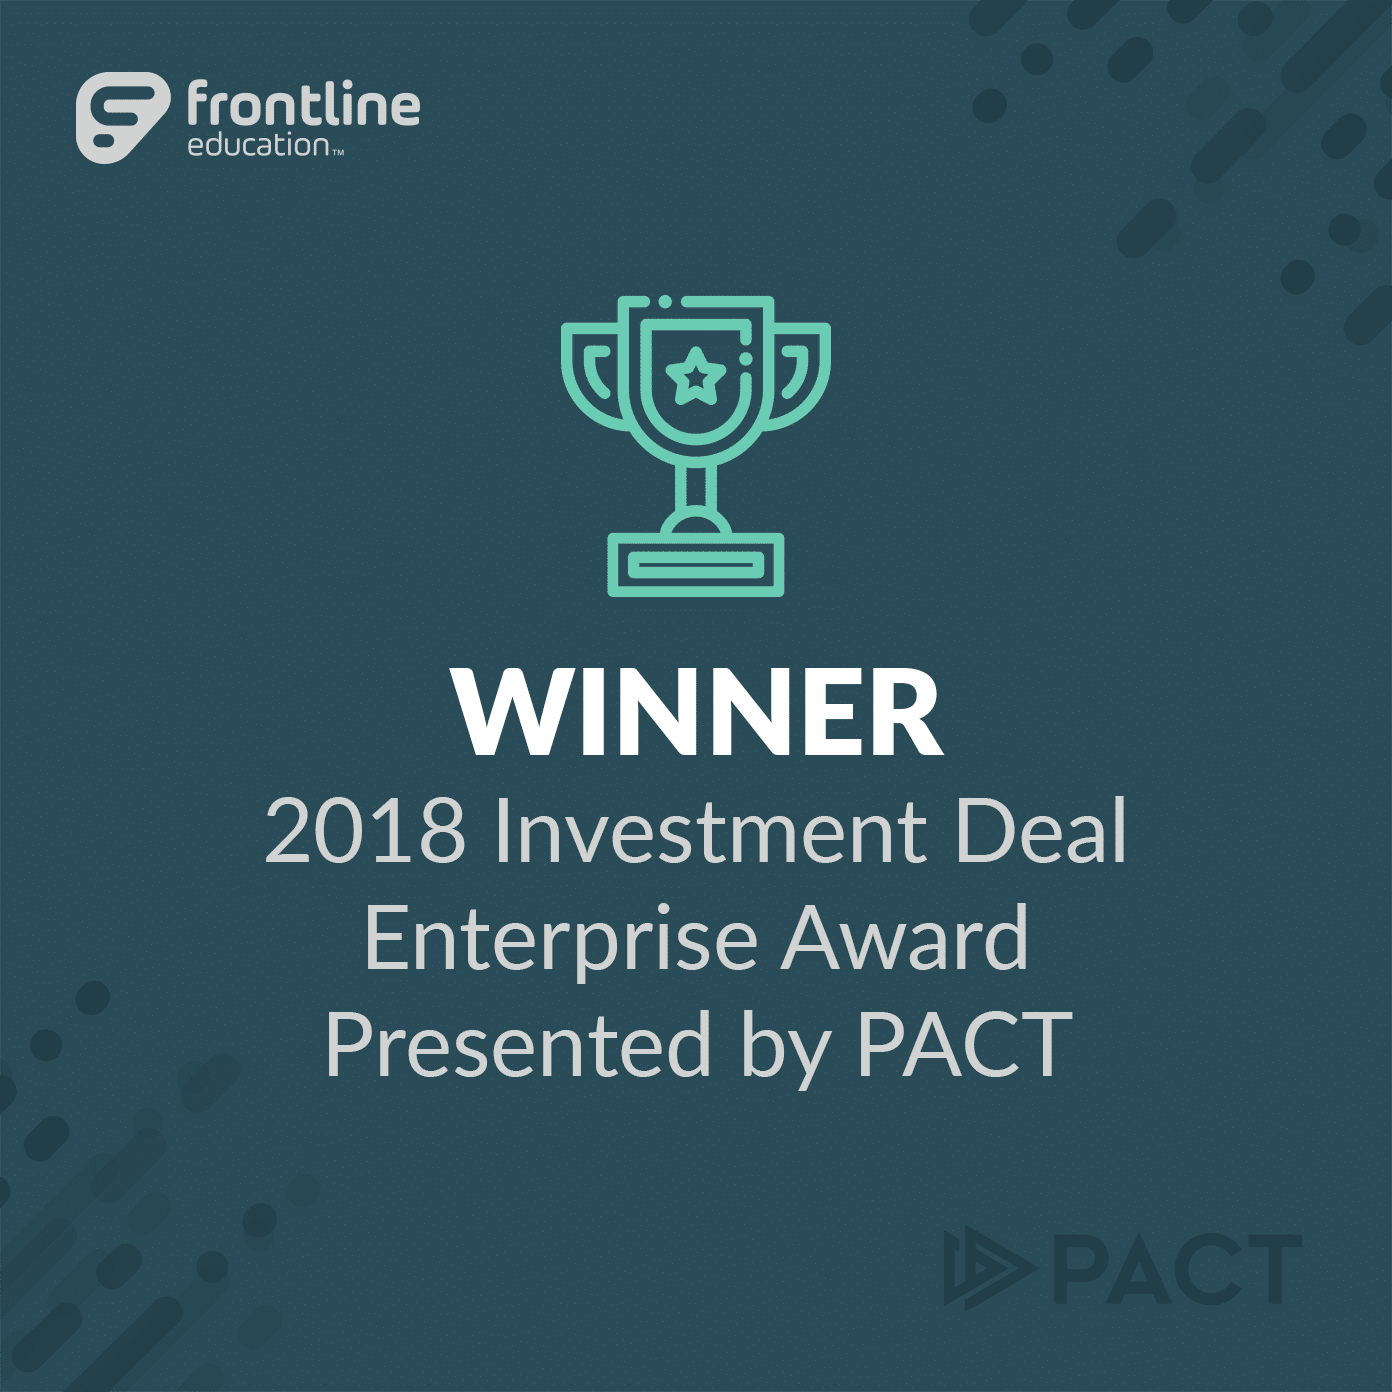 Frontline Education Wins Investment Deal of the Year at 2018 Enterprise Awards Presented by PACT